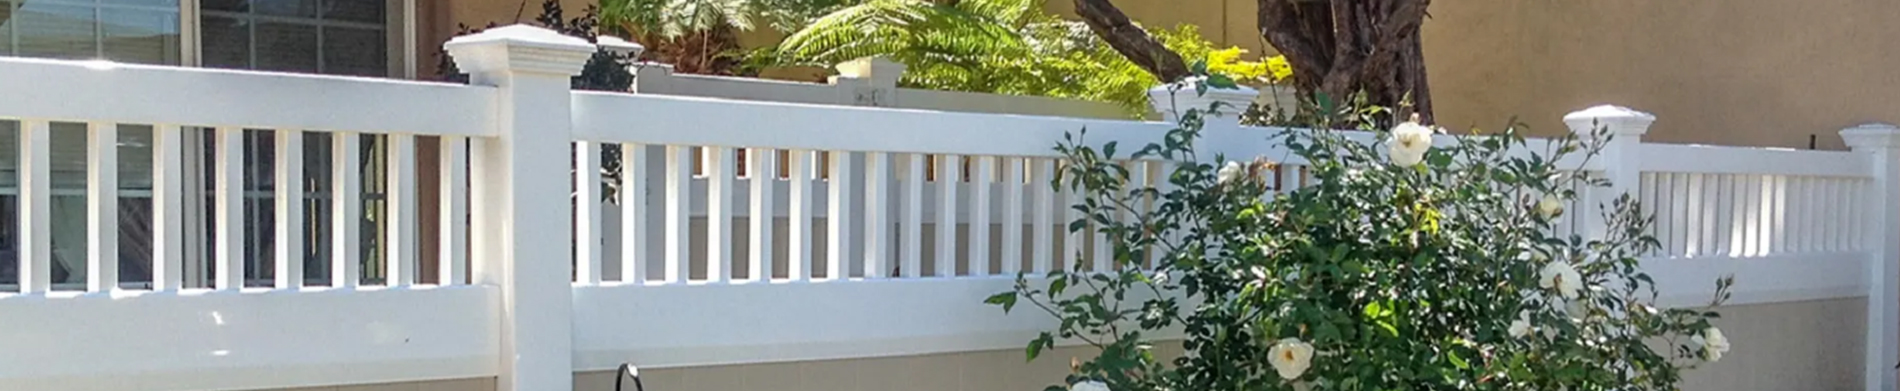 Customized Vinyl Fencing Is Best To Demarcate Your Property